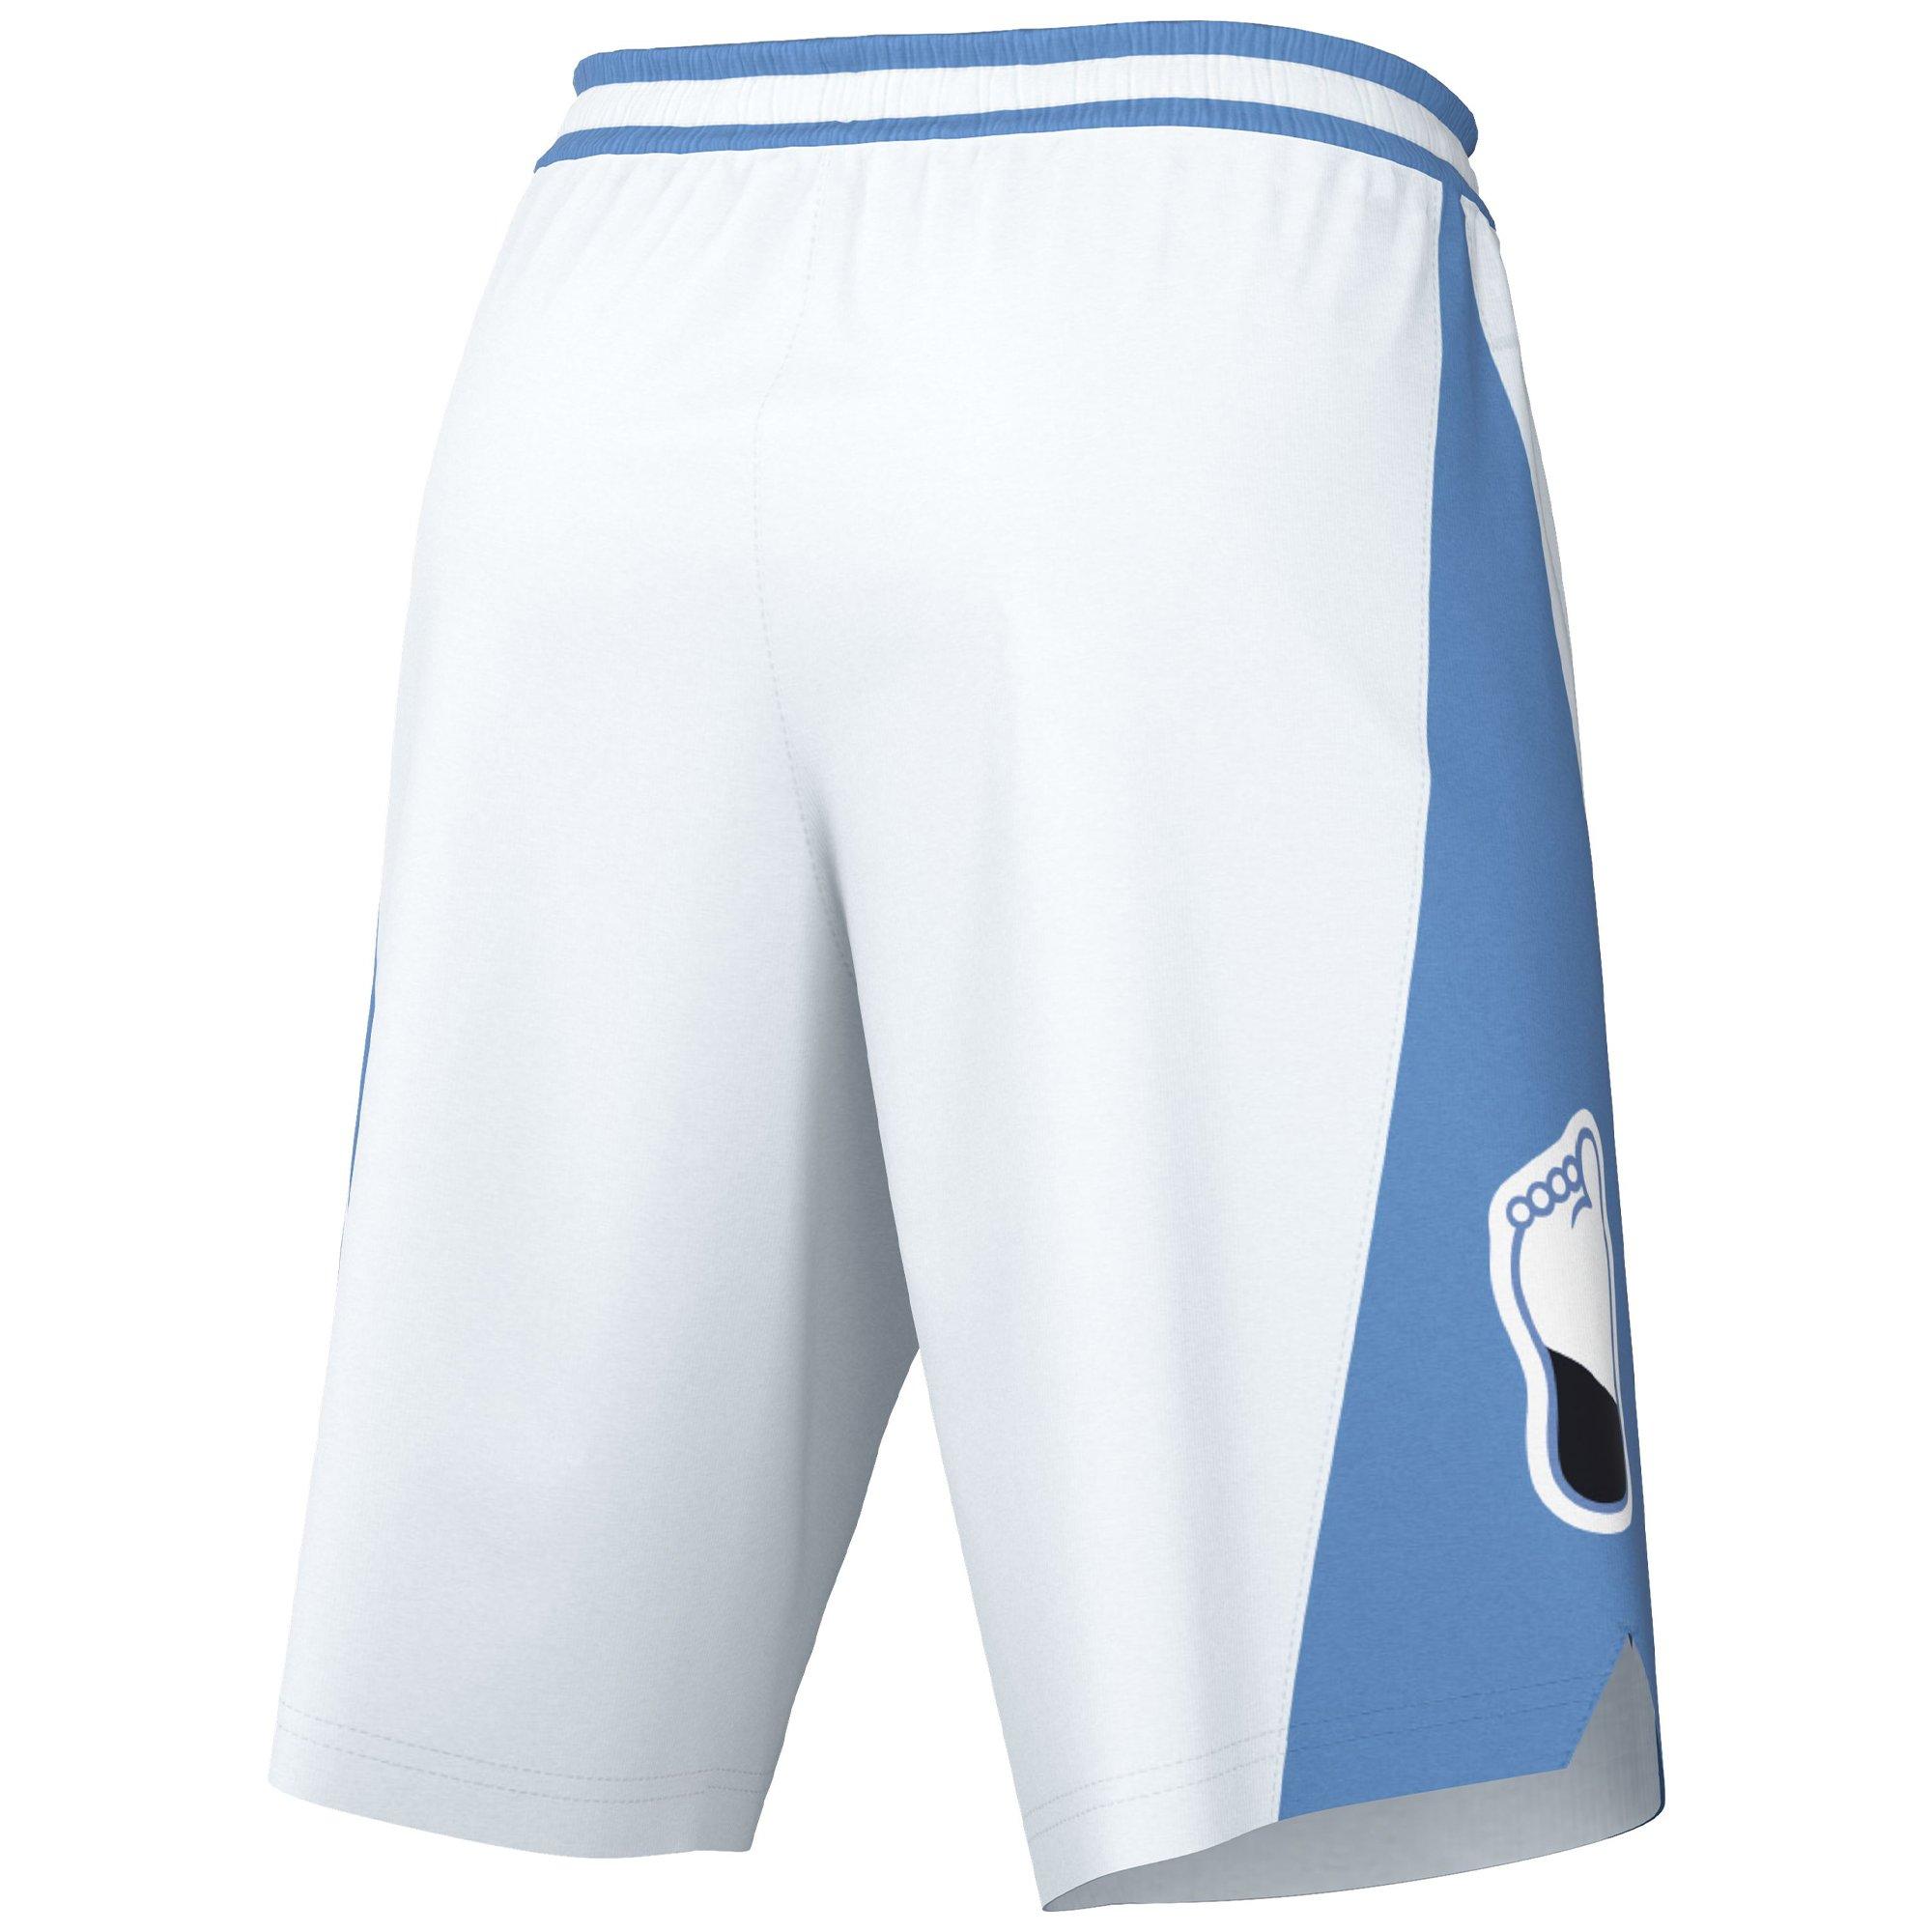 Nike College Dri-fit (unc) Basketball Shorts in Blue for Men